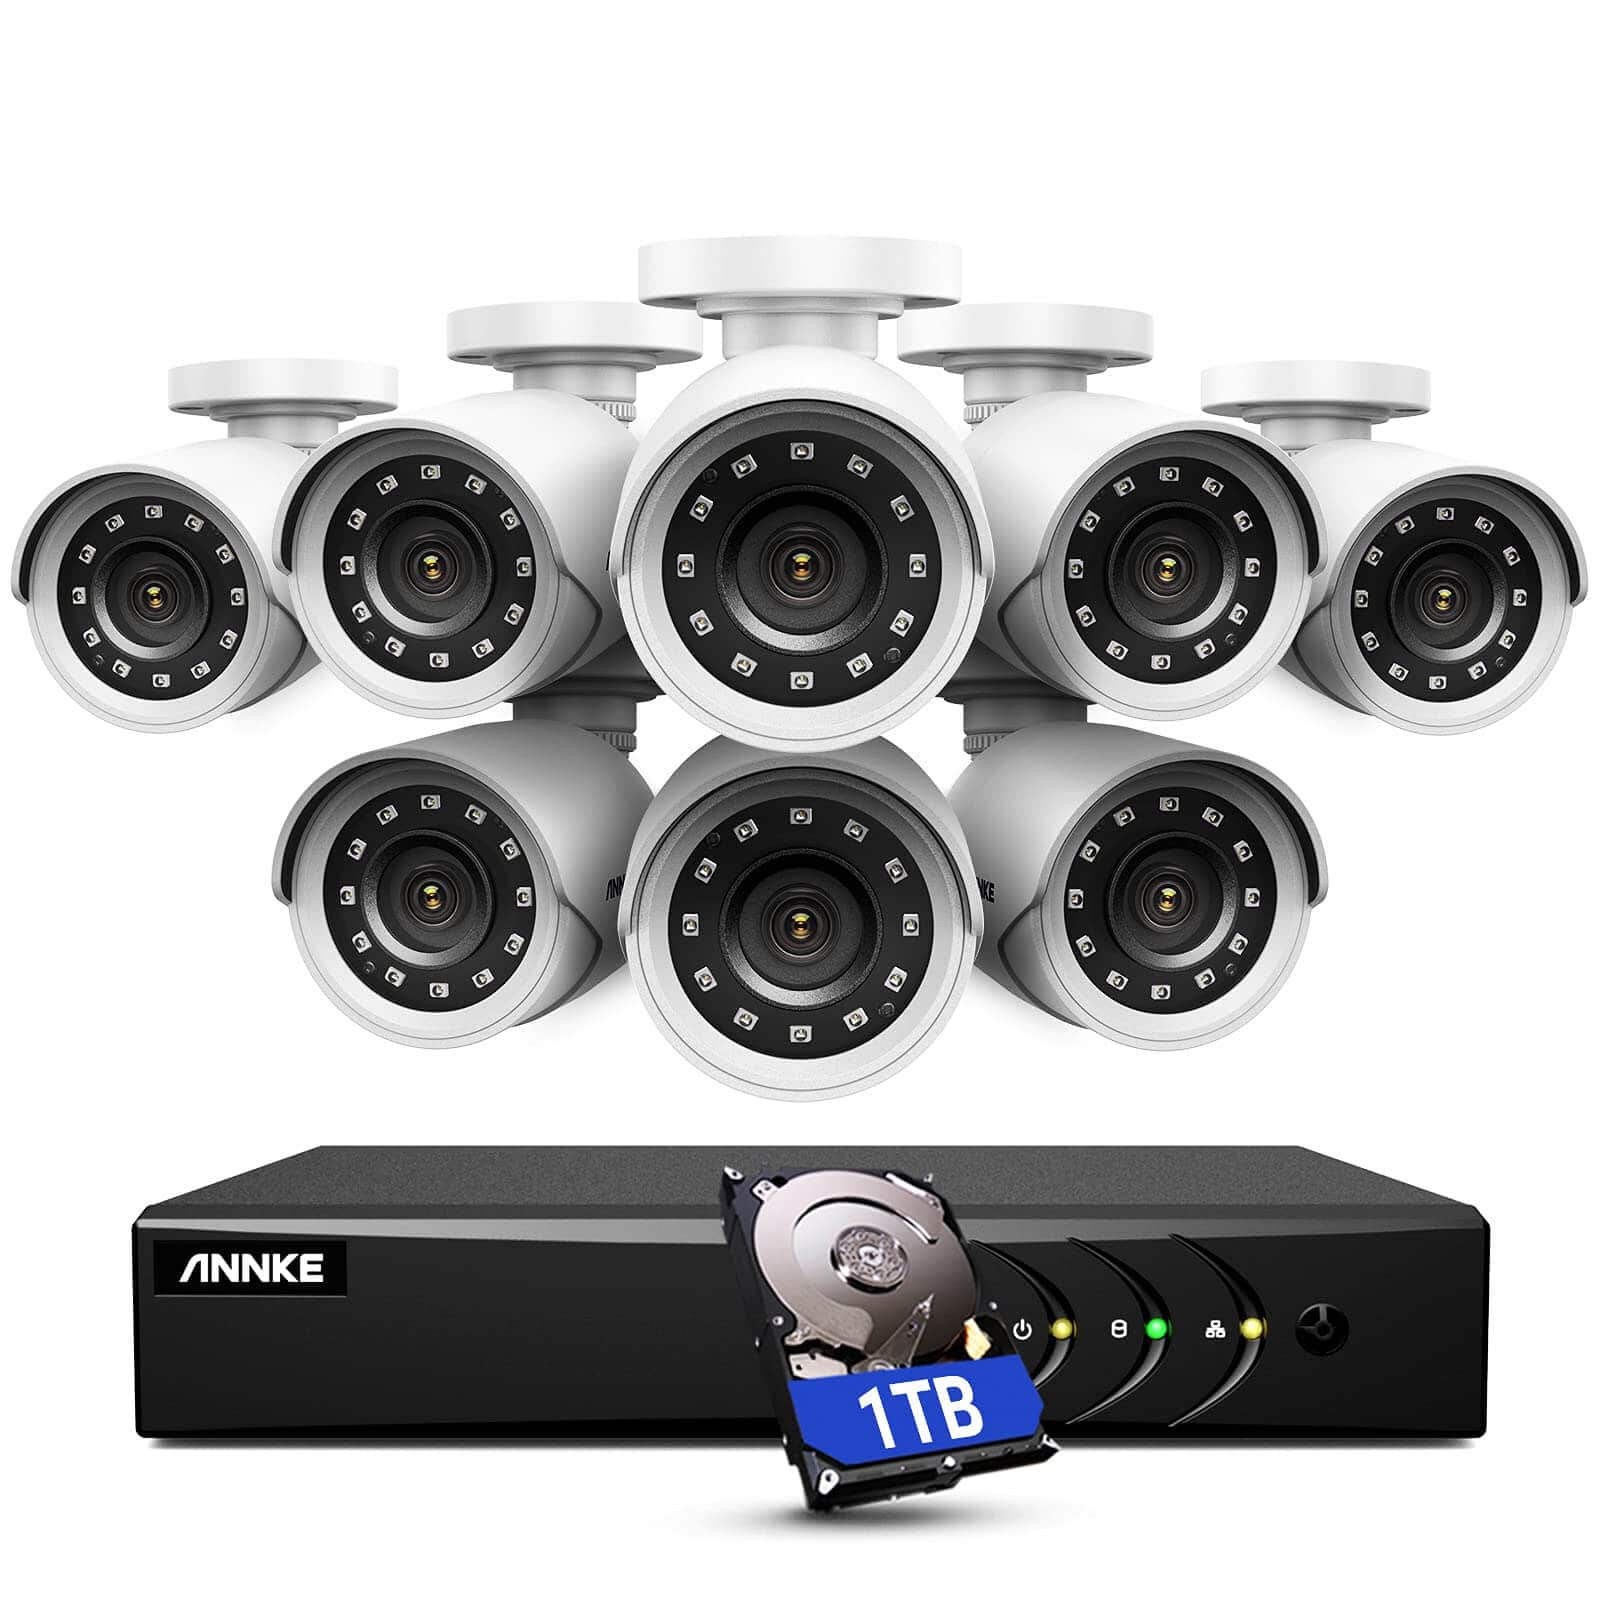 ANNKE 5MP Lite Wired Security Camera System with 1TB Hard Drive, H.265+ 8CH Surveillance DVR and 8 x 1080p HD Weatherproof CCTV Camera, 100 ft Night Vision, Easy Remote Access – E200